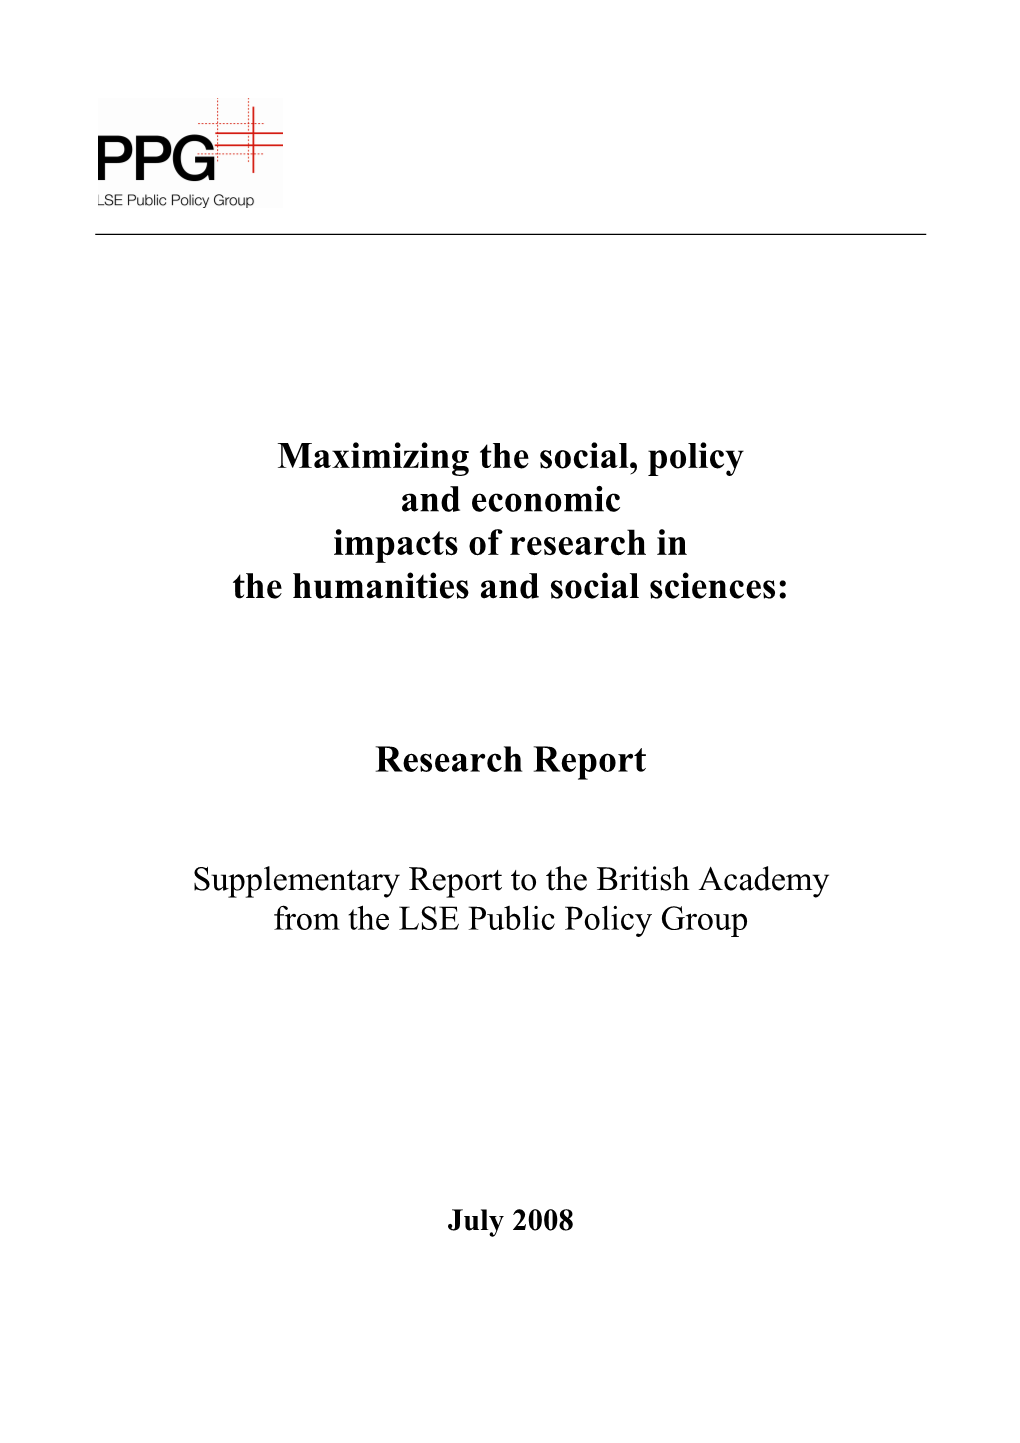 Maximizing the Social, Policy and Economic Impacts of Research in the Humanities and Social Sciences